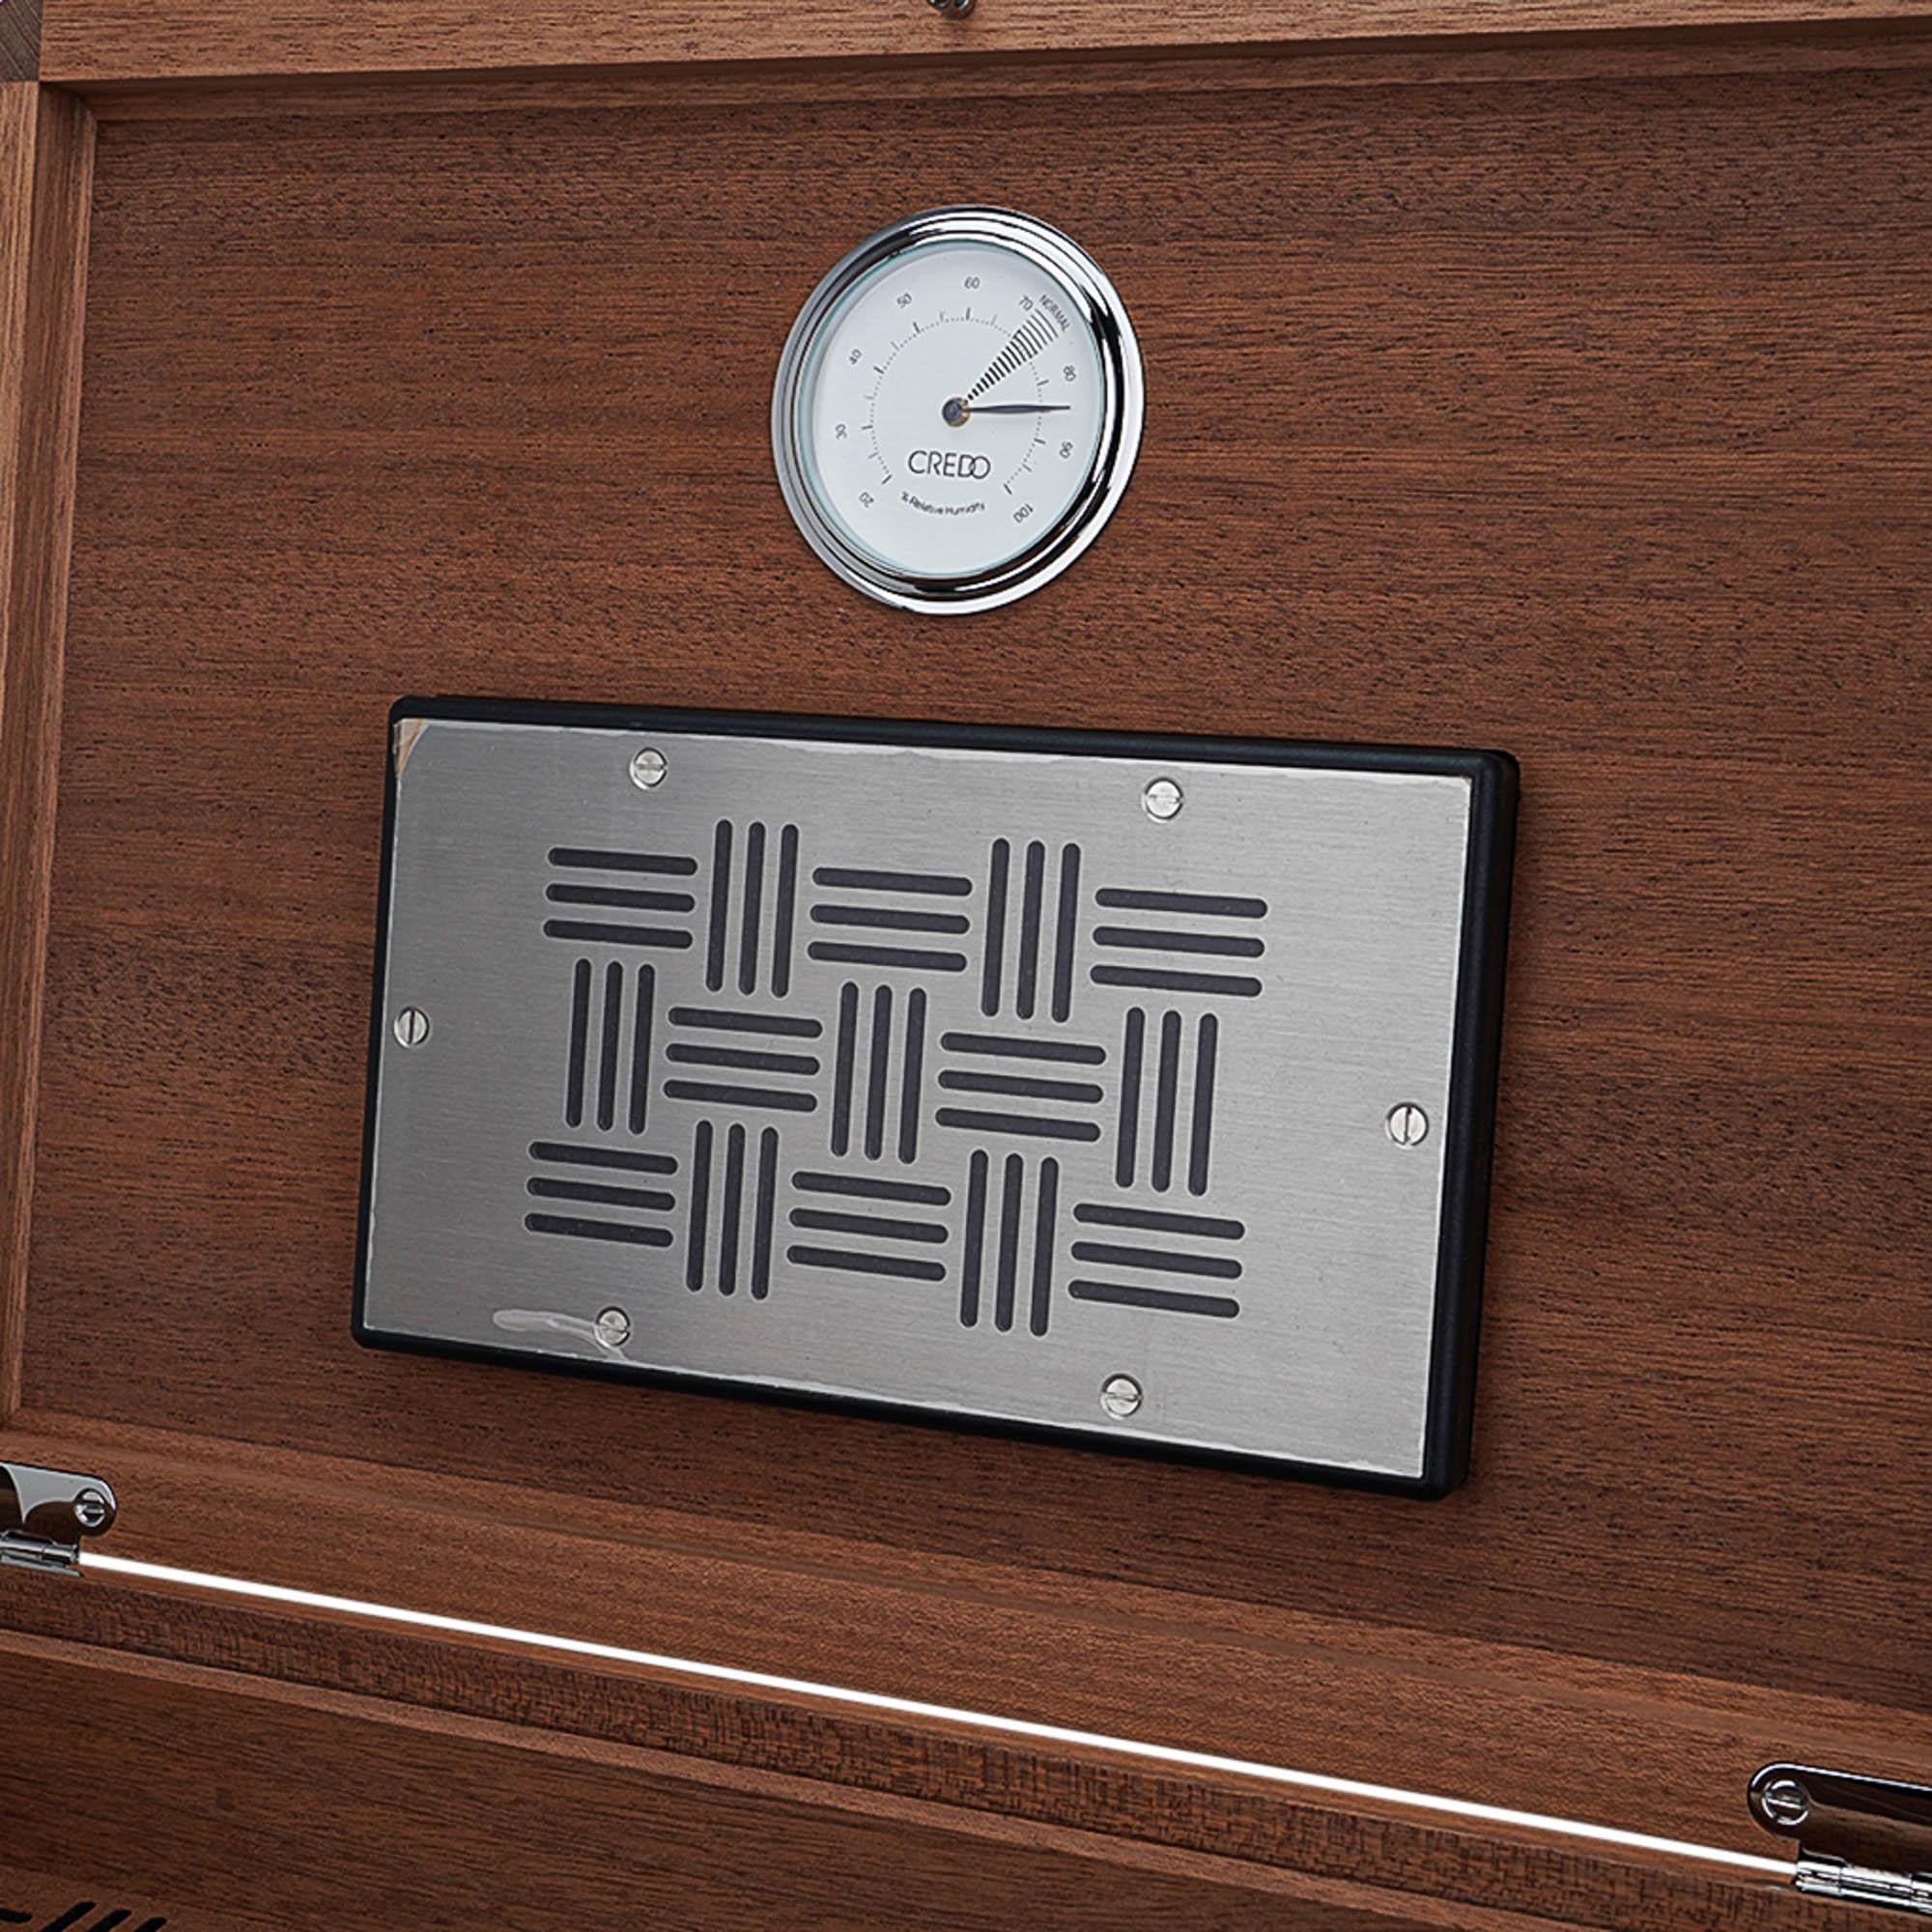 Hermes Coffret a Cigares Humidor Limited Edition Sycamore Holz Sesam Eidechse im Angebot 7